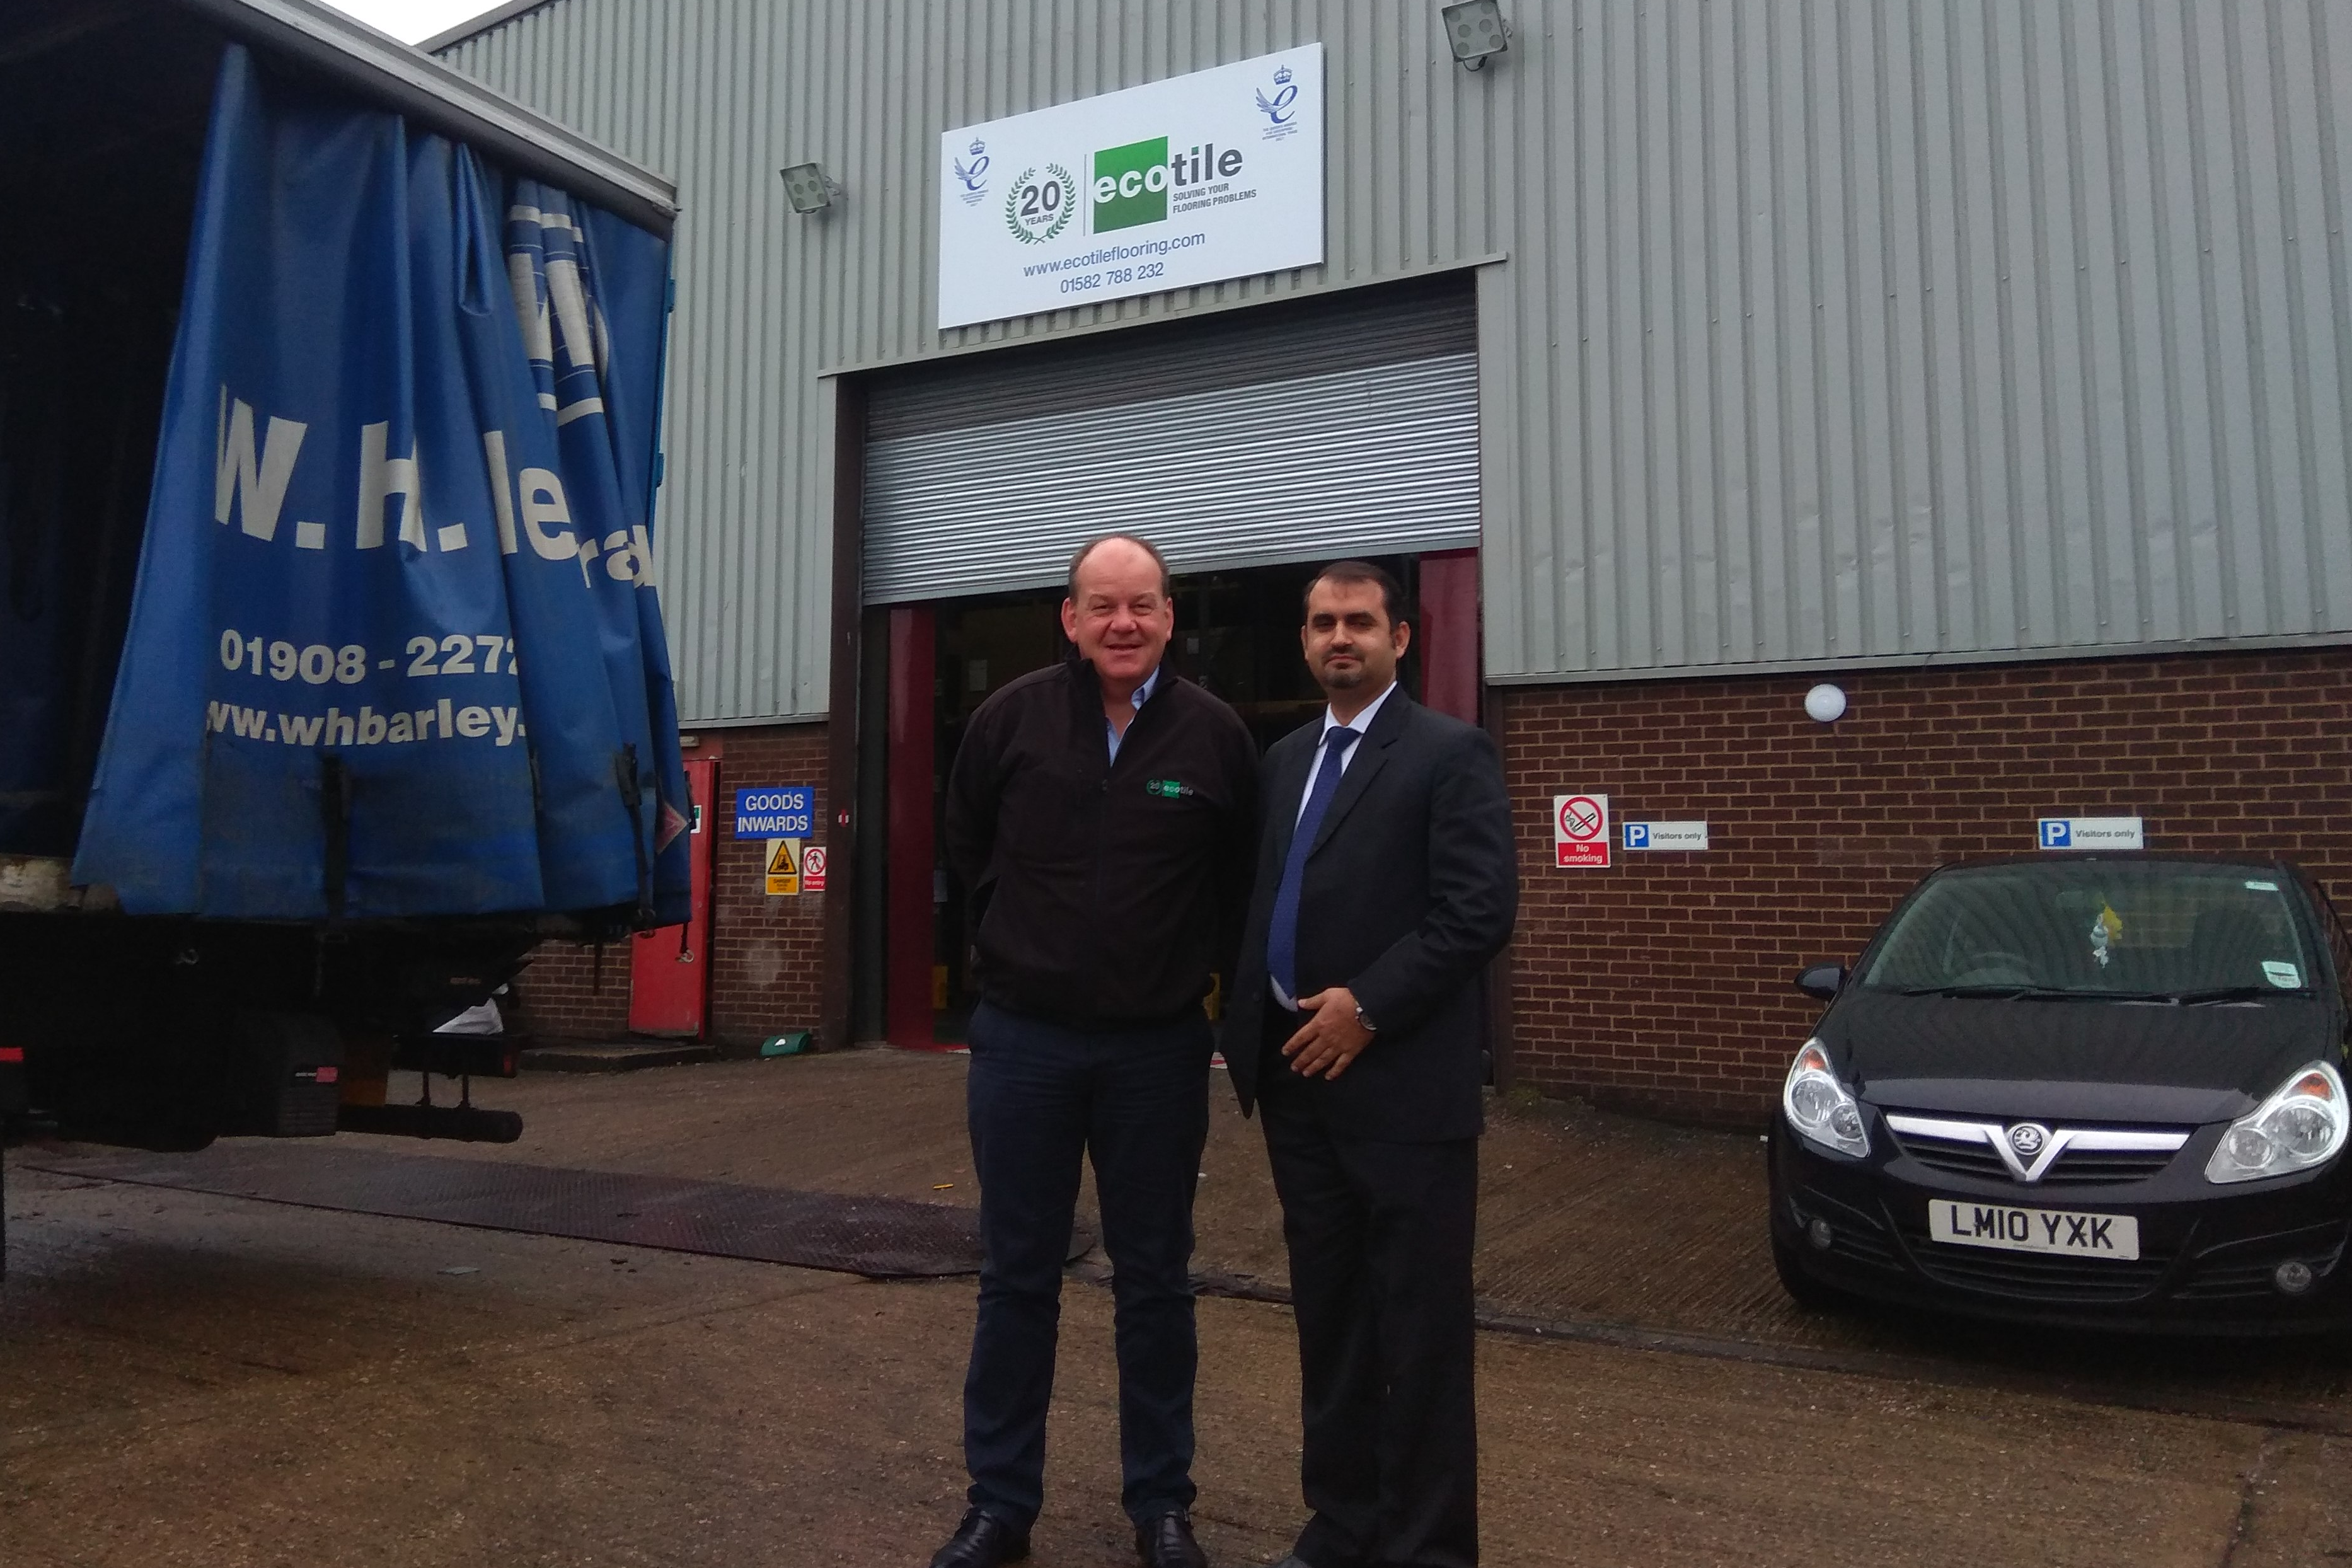 Factory visit to Luton, UK by MD